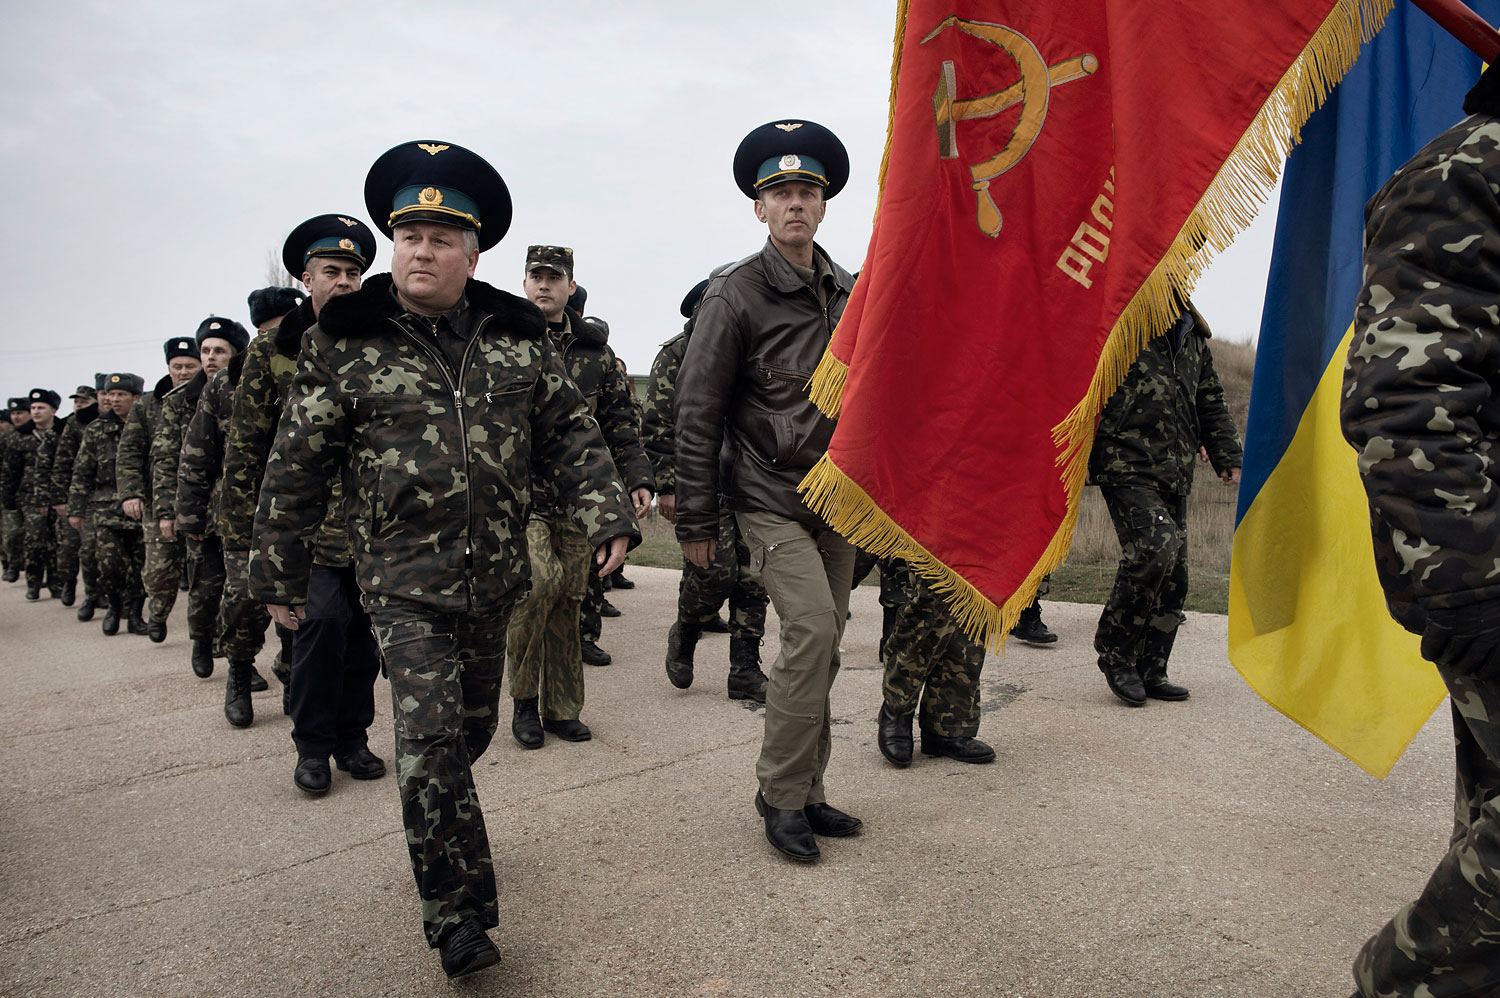 Unarmed Ukrainian soldiers, carrying a Soviet air-regiment banner, approach Russian positions on the perimeter of the contested Belbek air-force base in Crimea, Ukraine, on March 4, 2014.